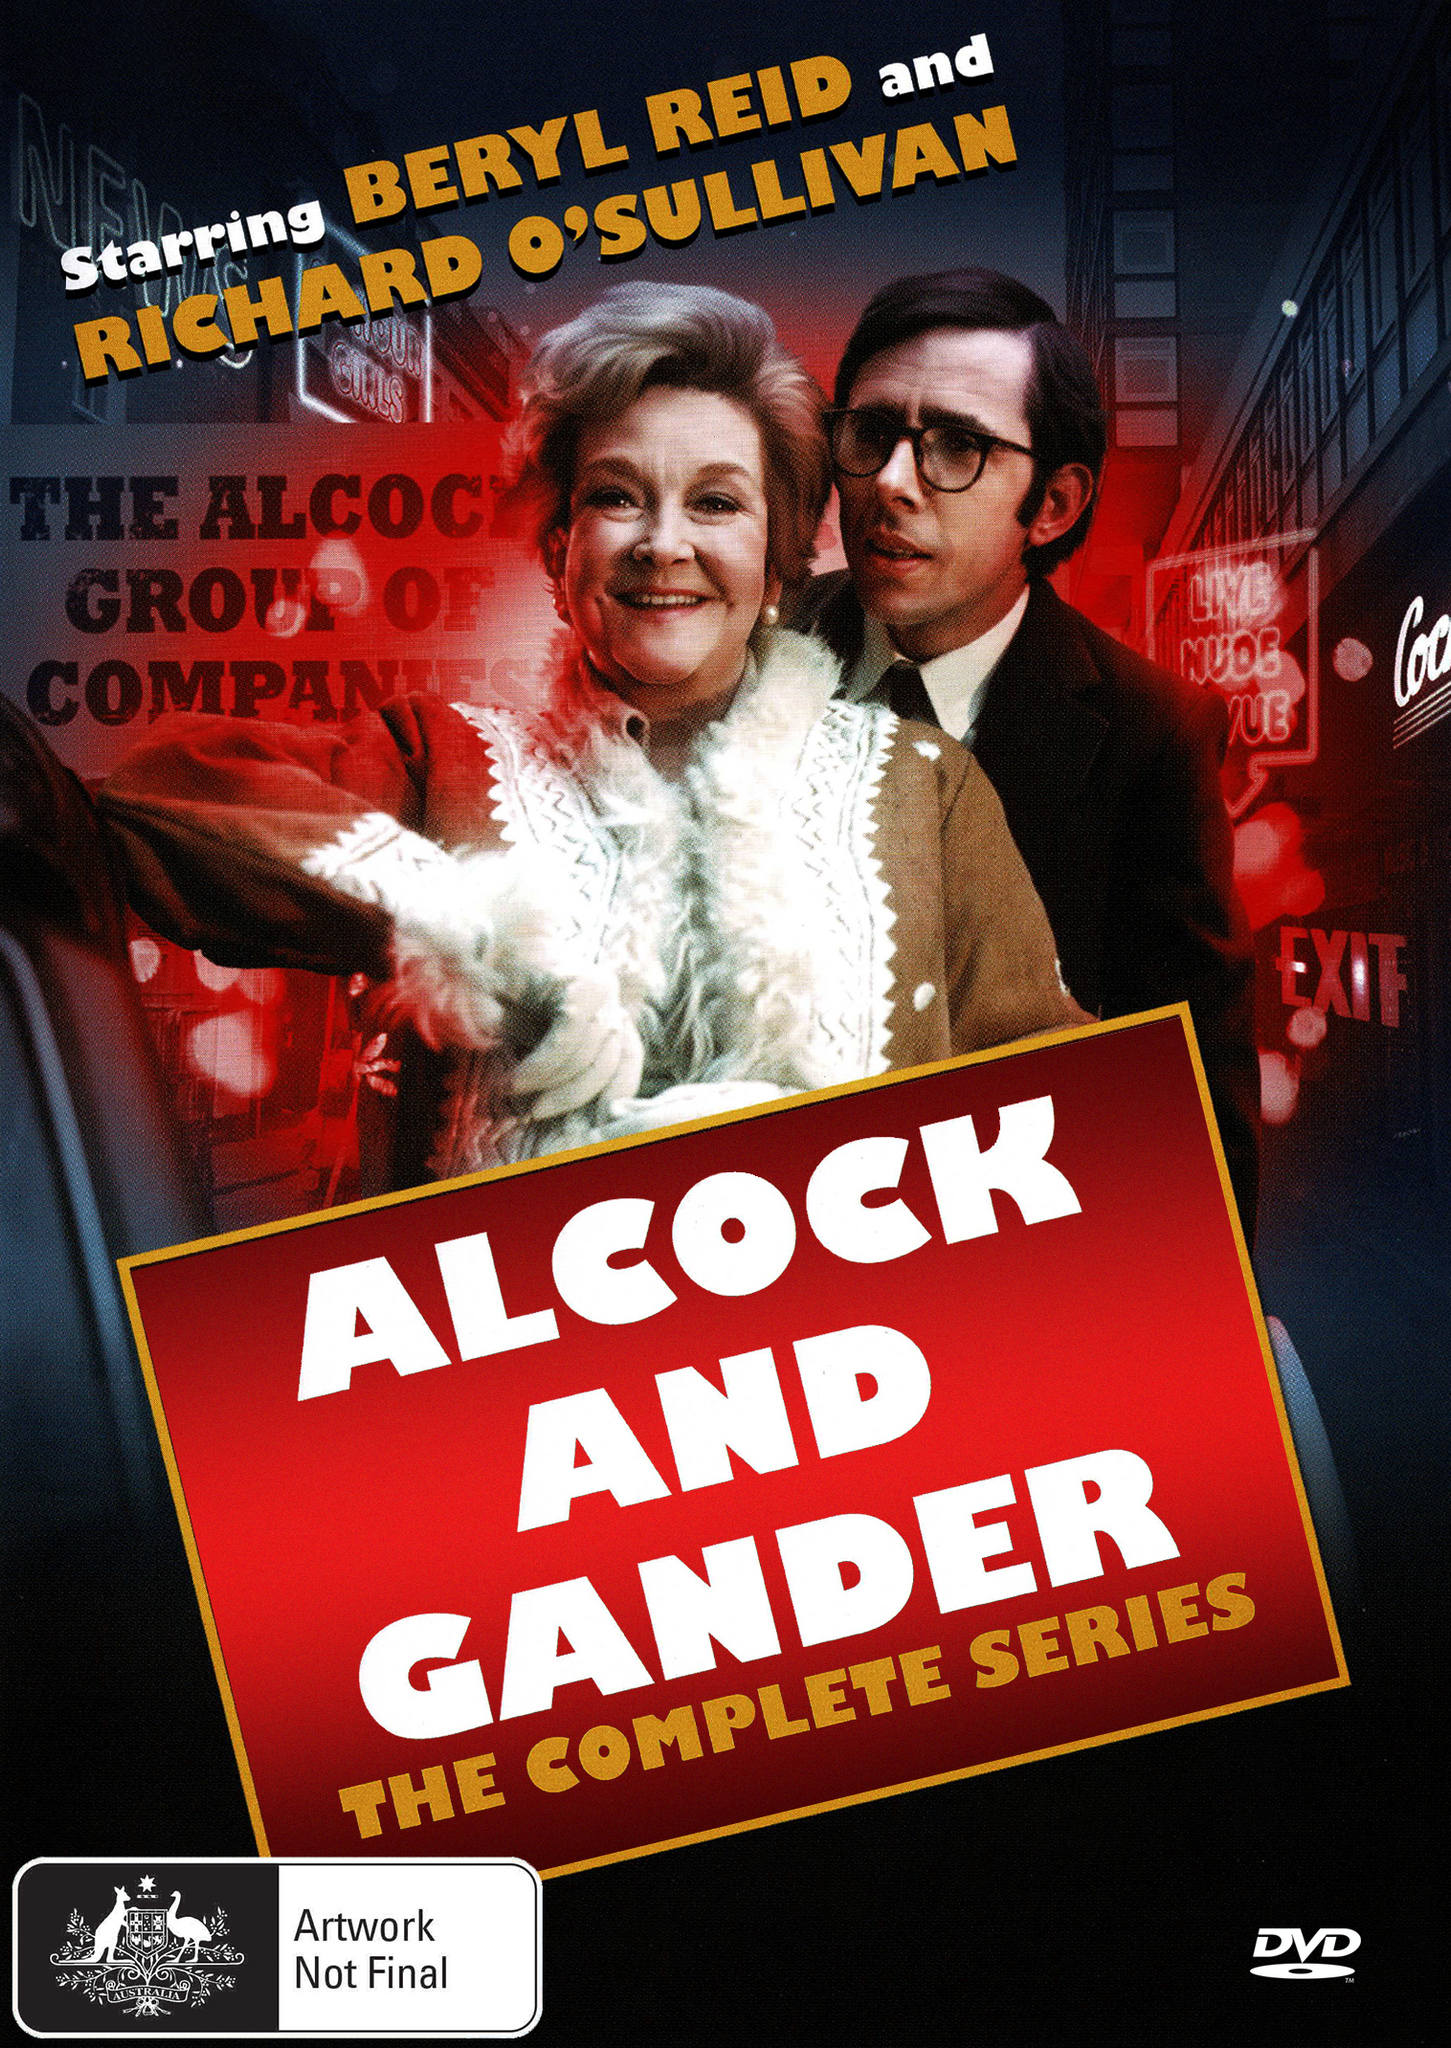 ALCOCK AND GANDER: THE COMPLETE SERIES